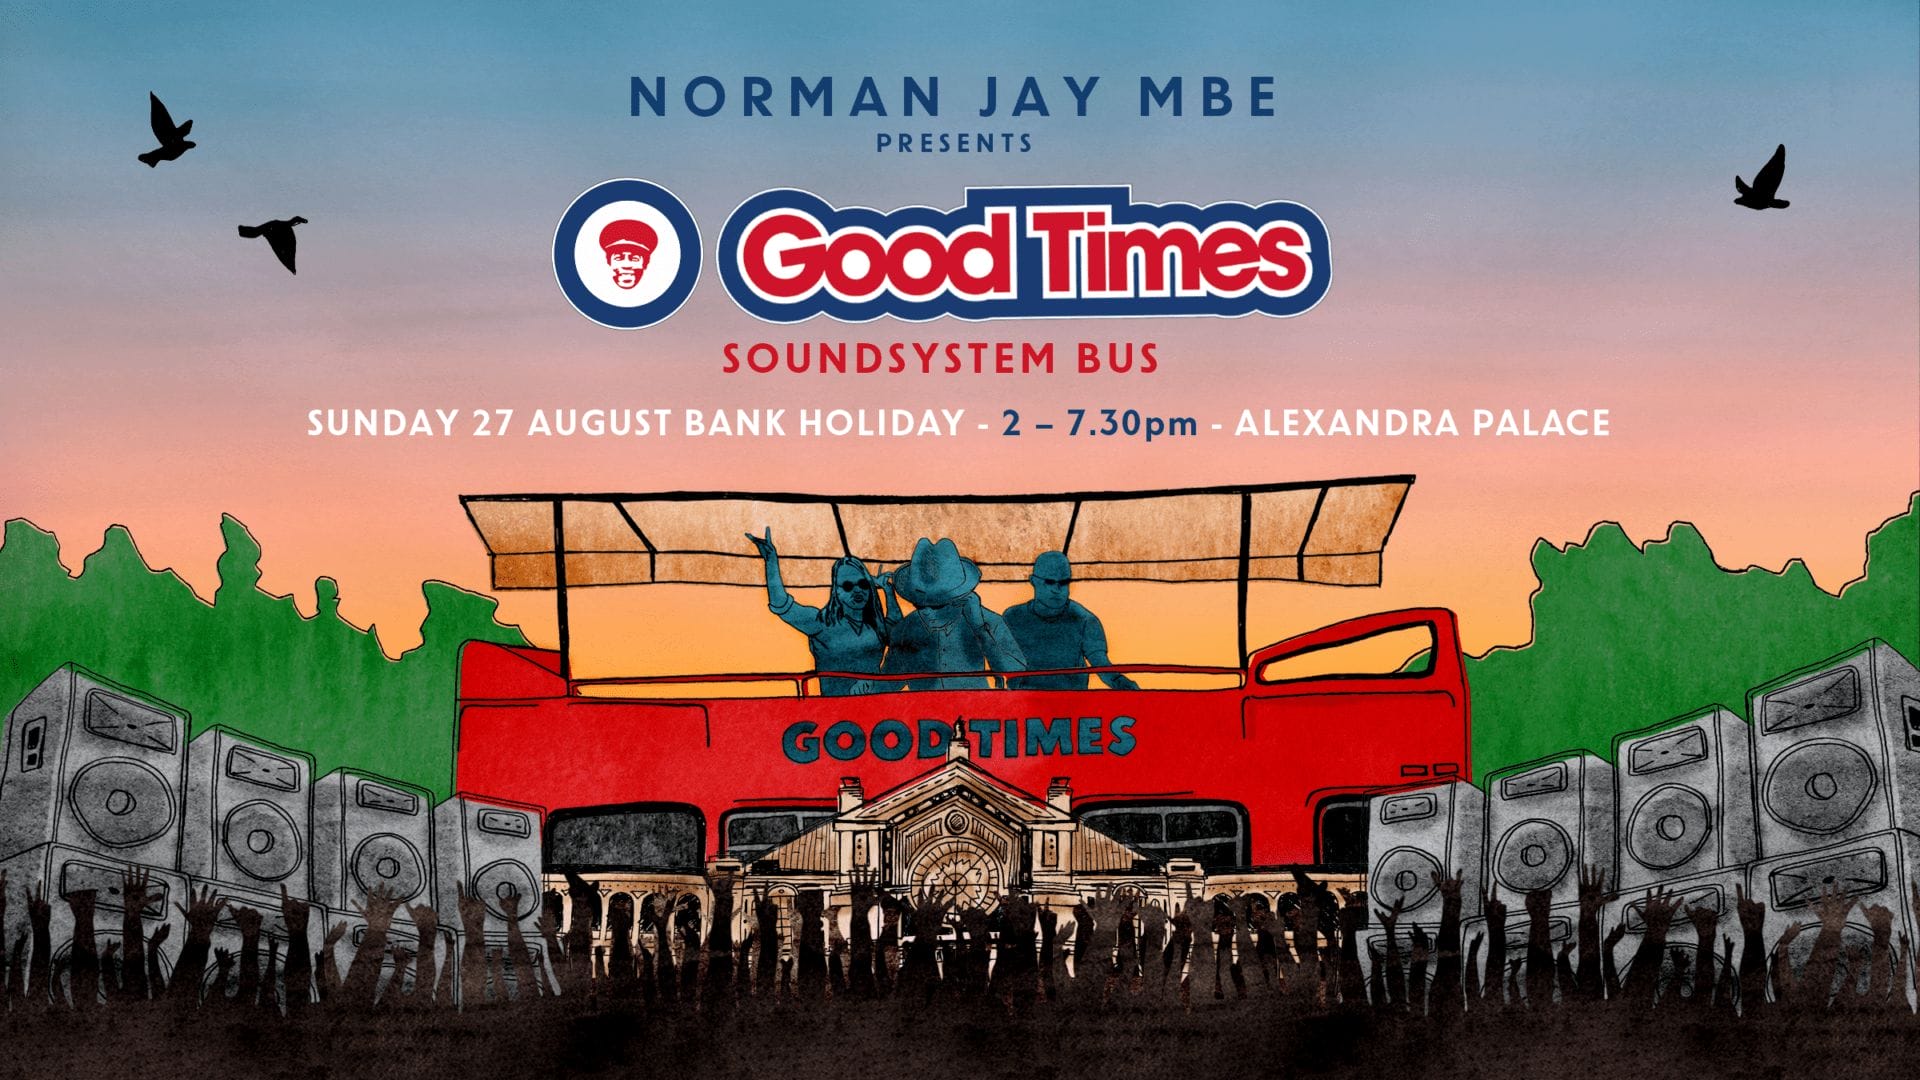 Norman Jay MBE Brings His World-Famous Good Times Sound System To Ally Pally This August Bank Holiday